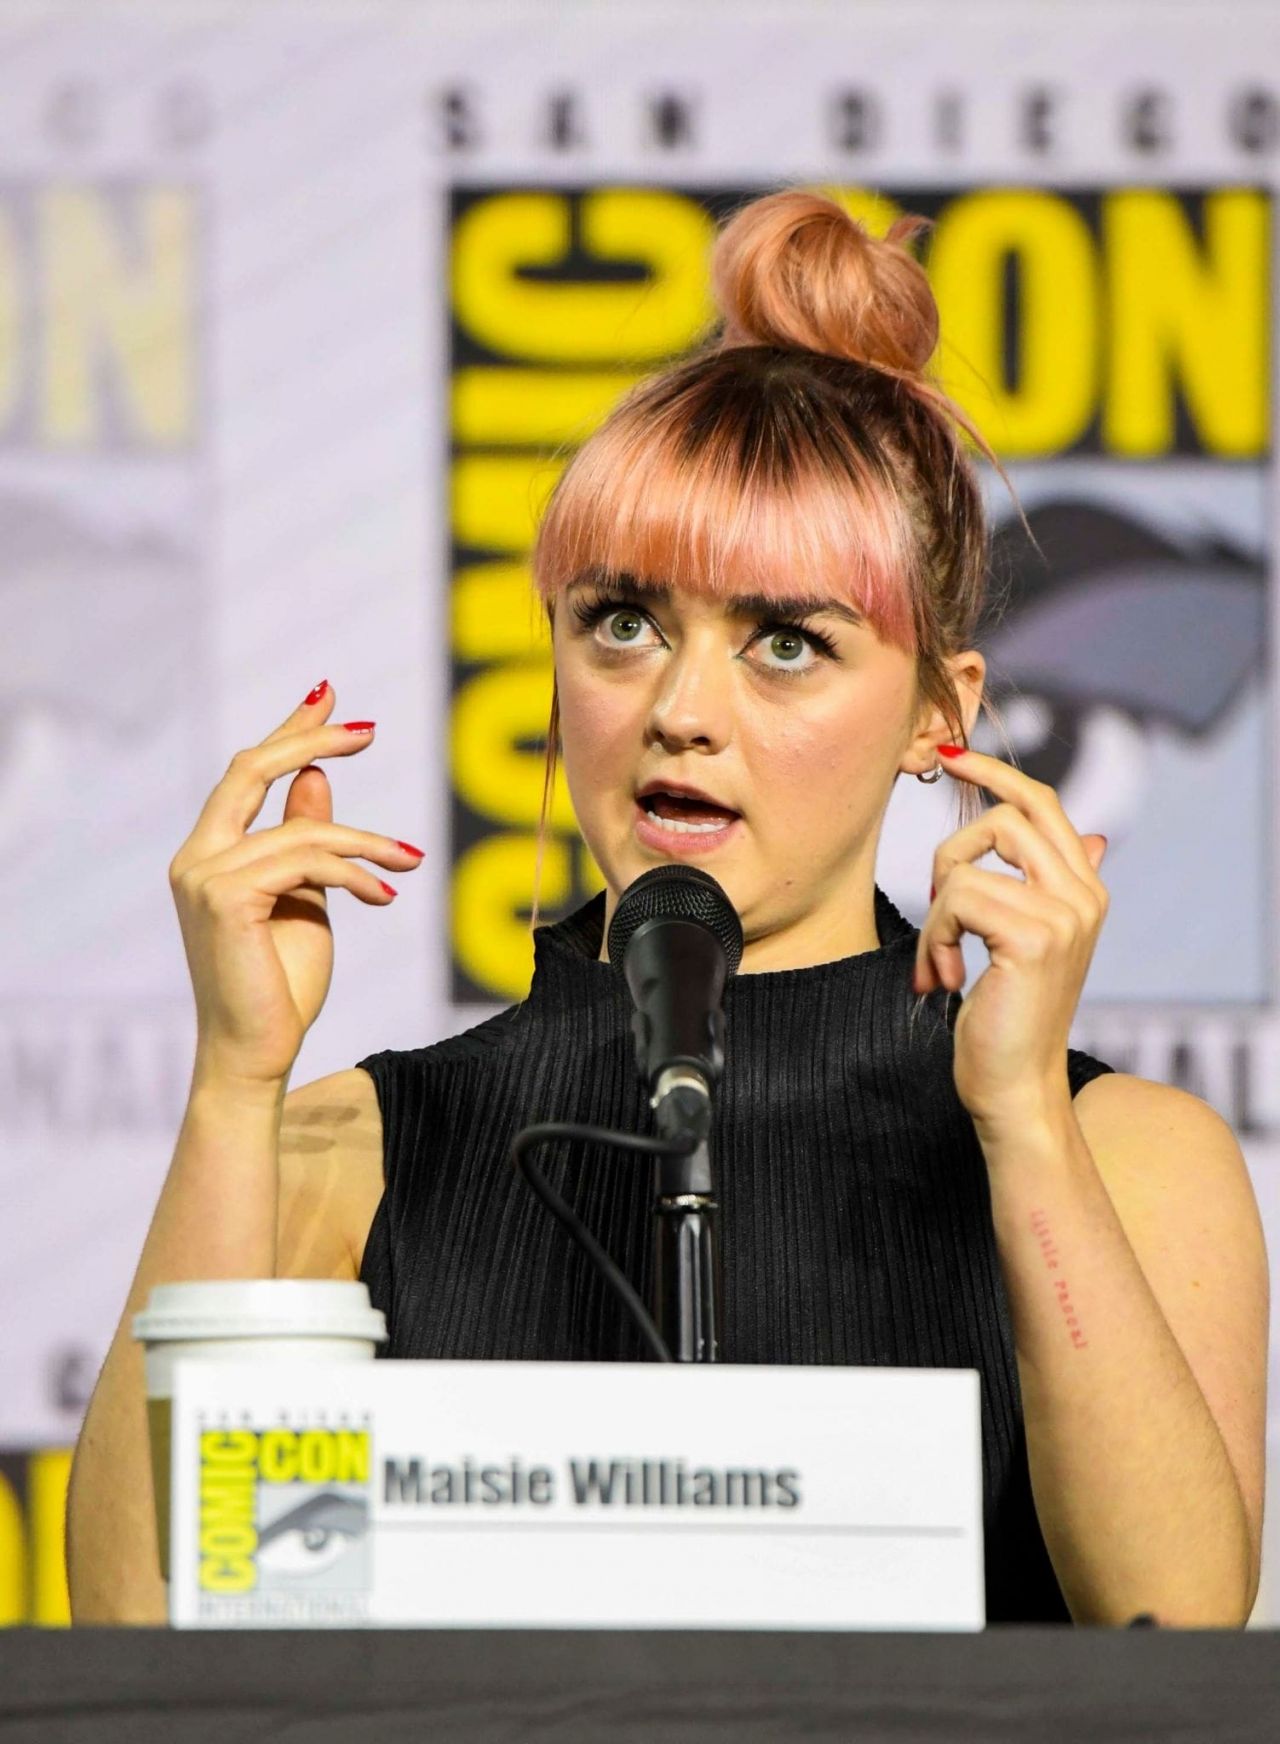 maisie-williams-game-of-thrones-panel-q-a-at-sdcc-2019-8.jpg